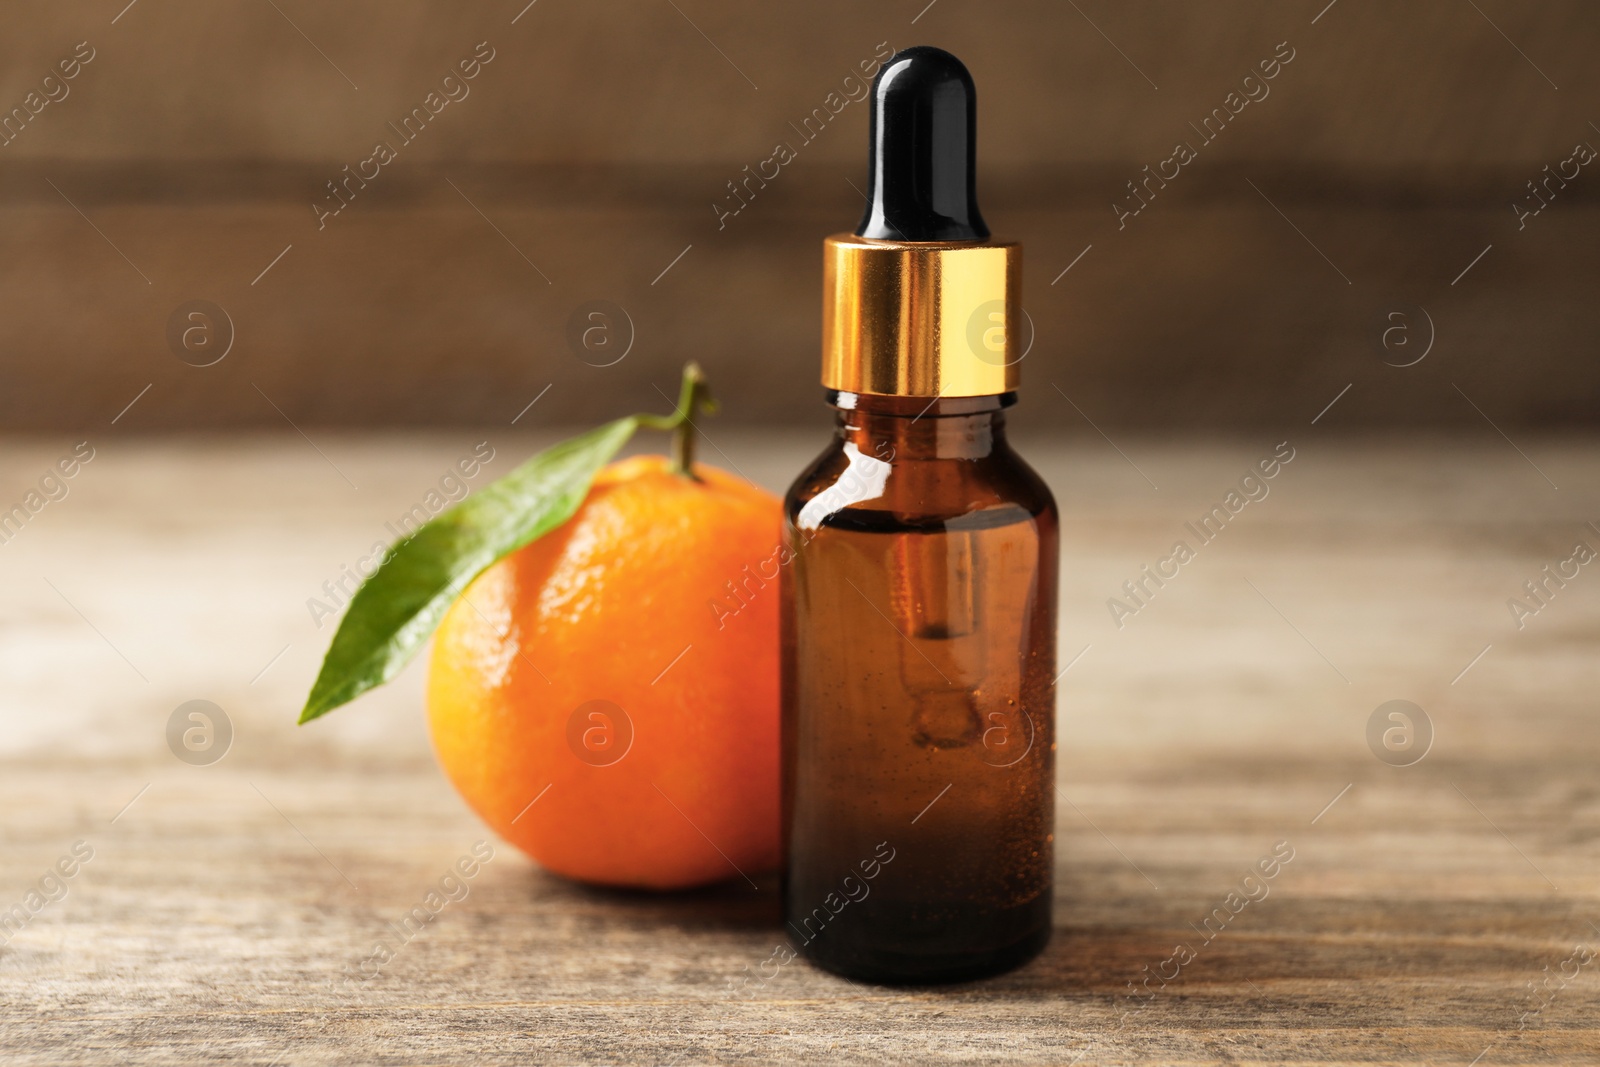 Photo of Bottle of tangerine essential oil and fresh fruit on wooden table, closeup